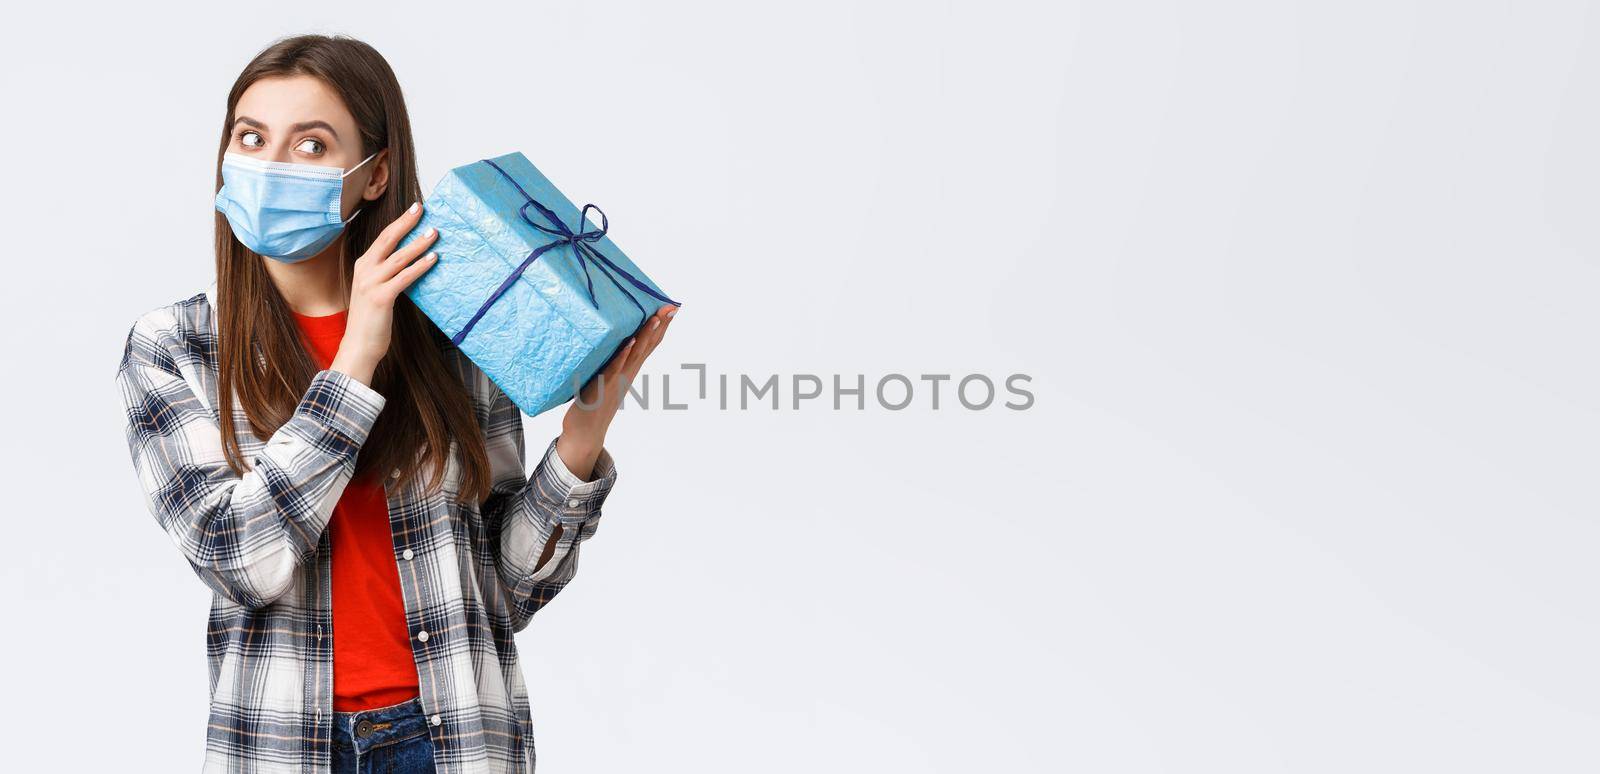 Covid-19, lifestyle, holidays and celebration concept. Cute birthday girl in medical mask, shaking gift box to guess what inside, receive b-day present, celebrating during coronavirus self-quarantine.